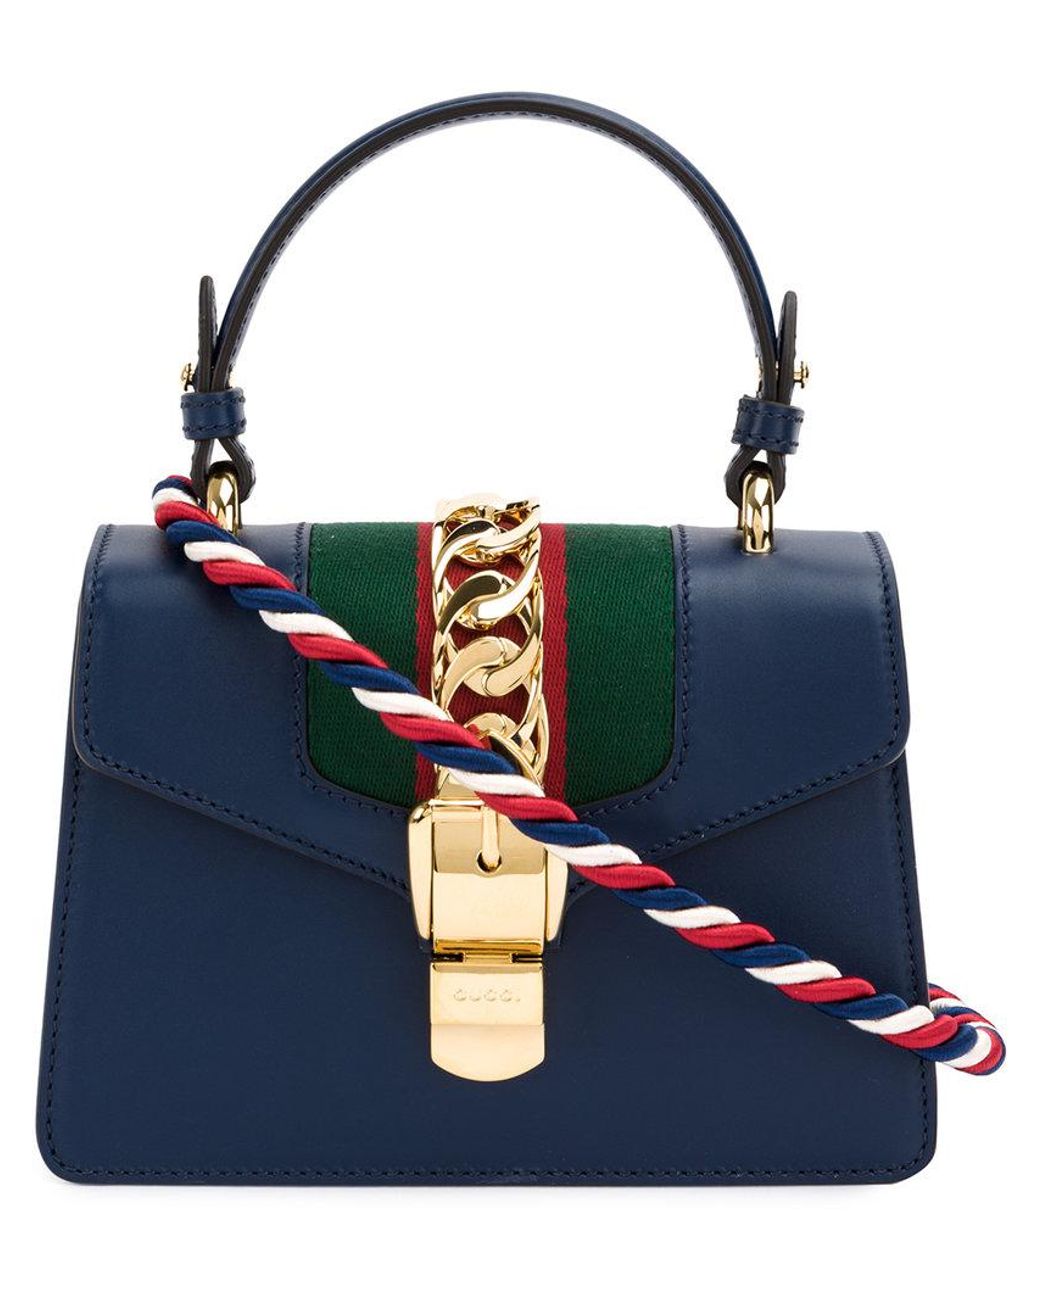 Gucci Sylvie Small Shoulder Bag in Blue | Lyst